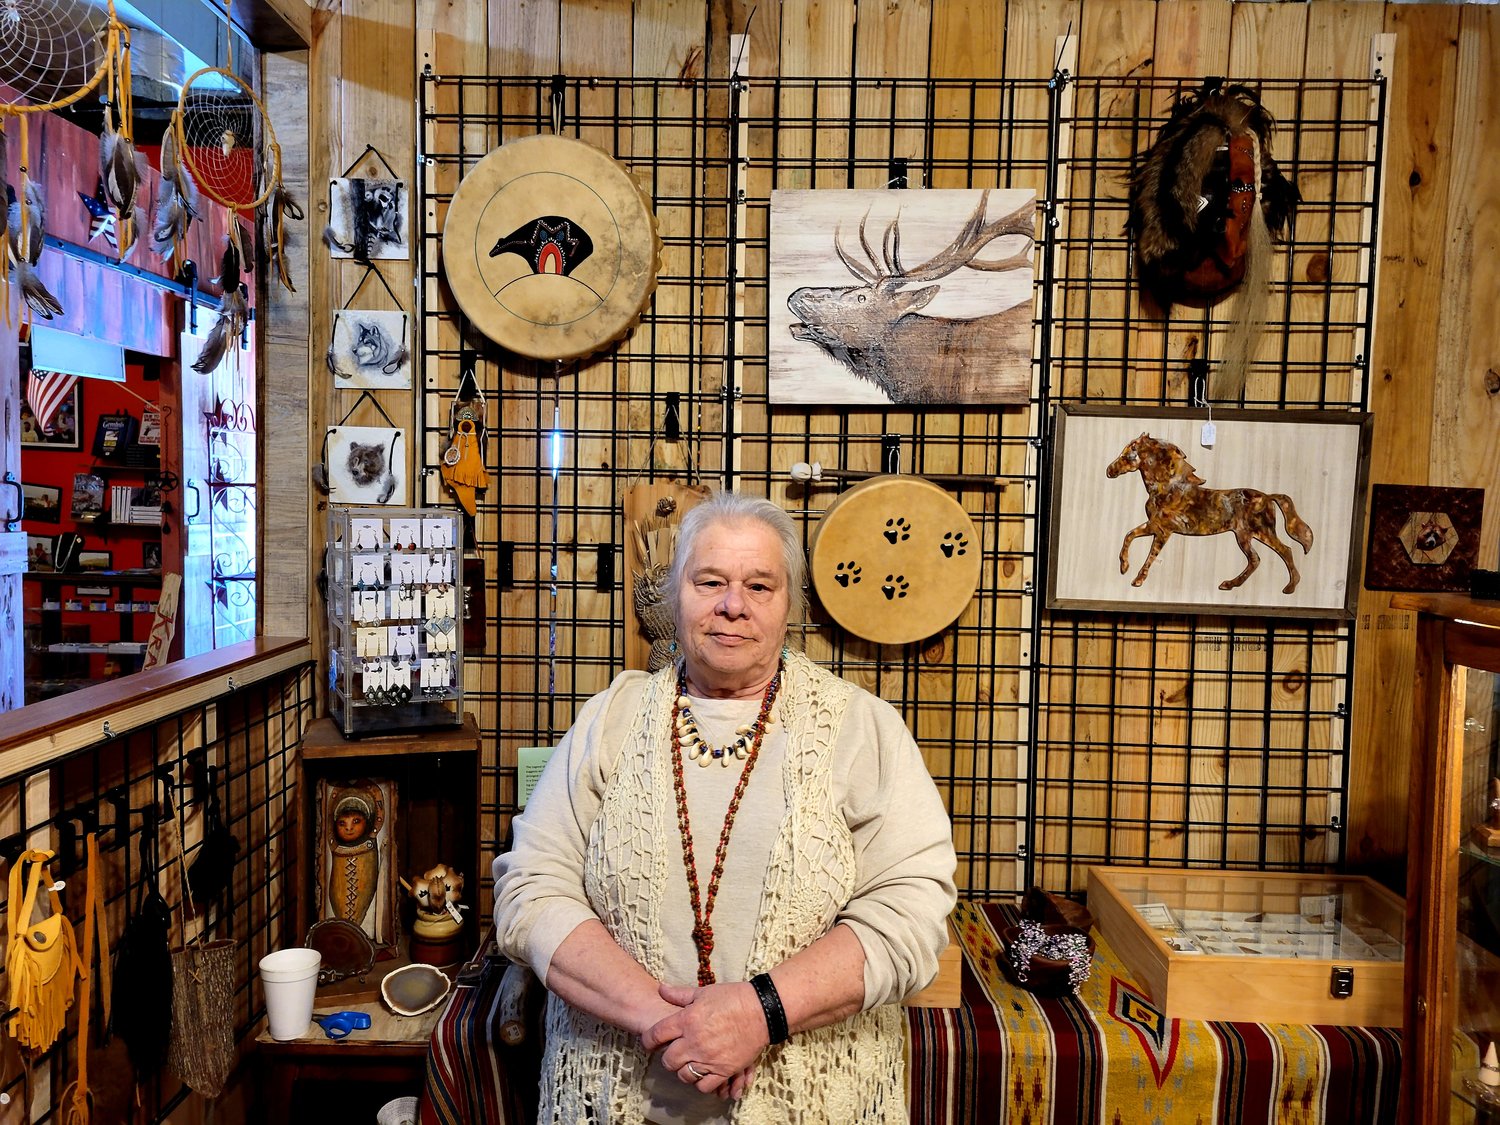 Gina Witten sells all kinds of Native American crafts in her booth Horse Mountain Mining.